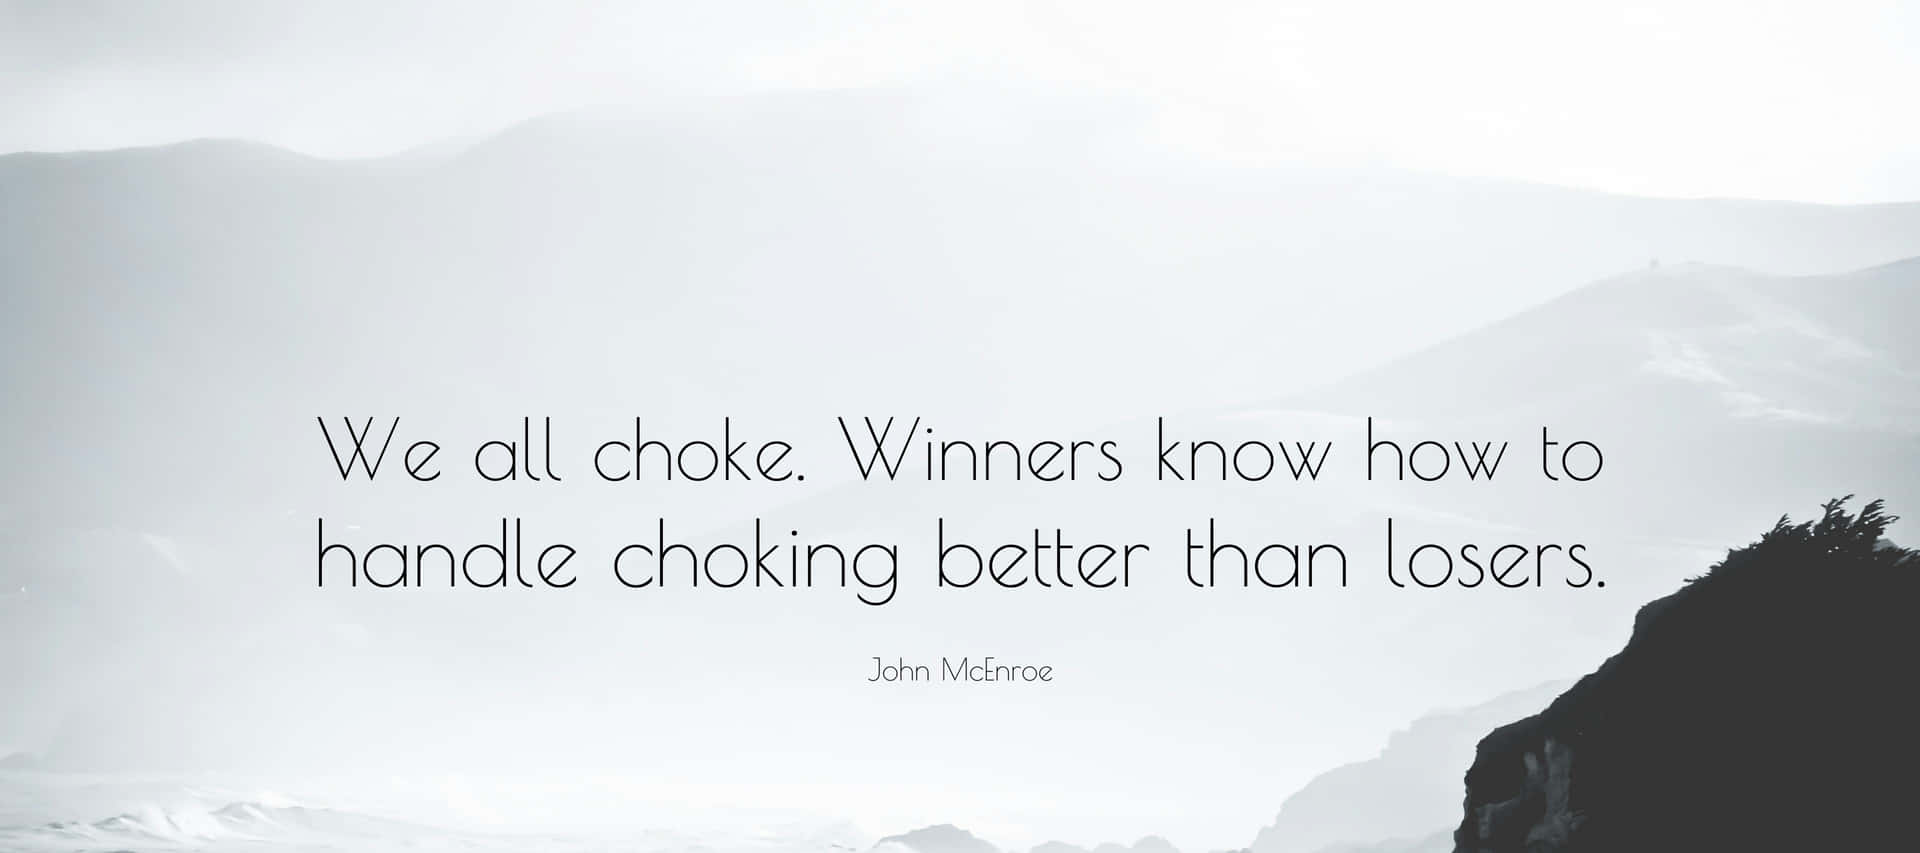 A Quote That Says We All Choose Winners How To Handle Chugging Better Than Losers Background